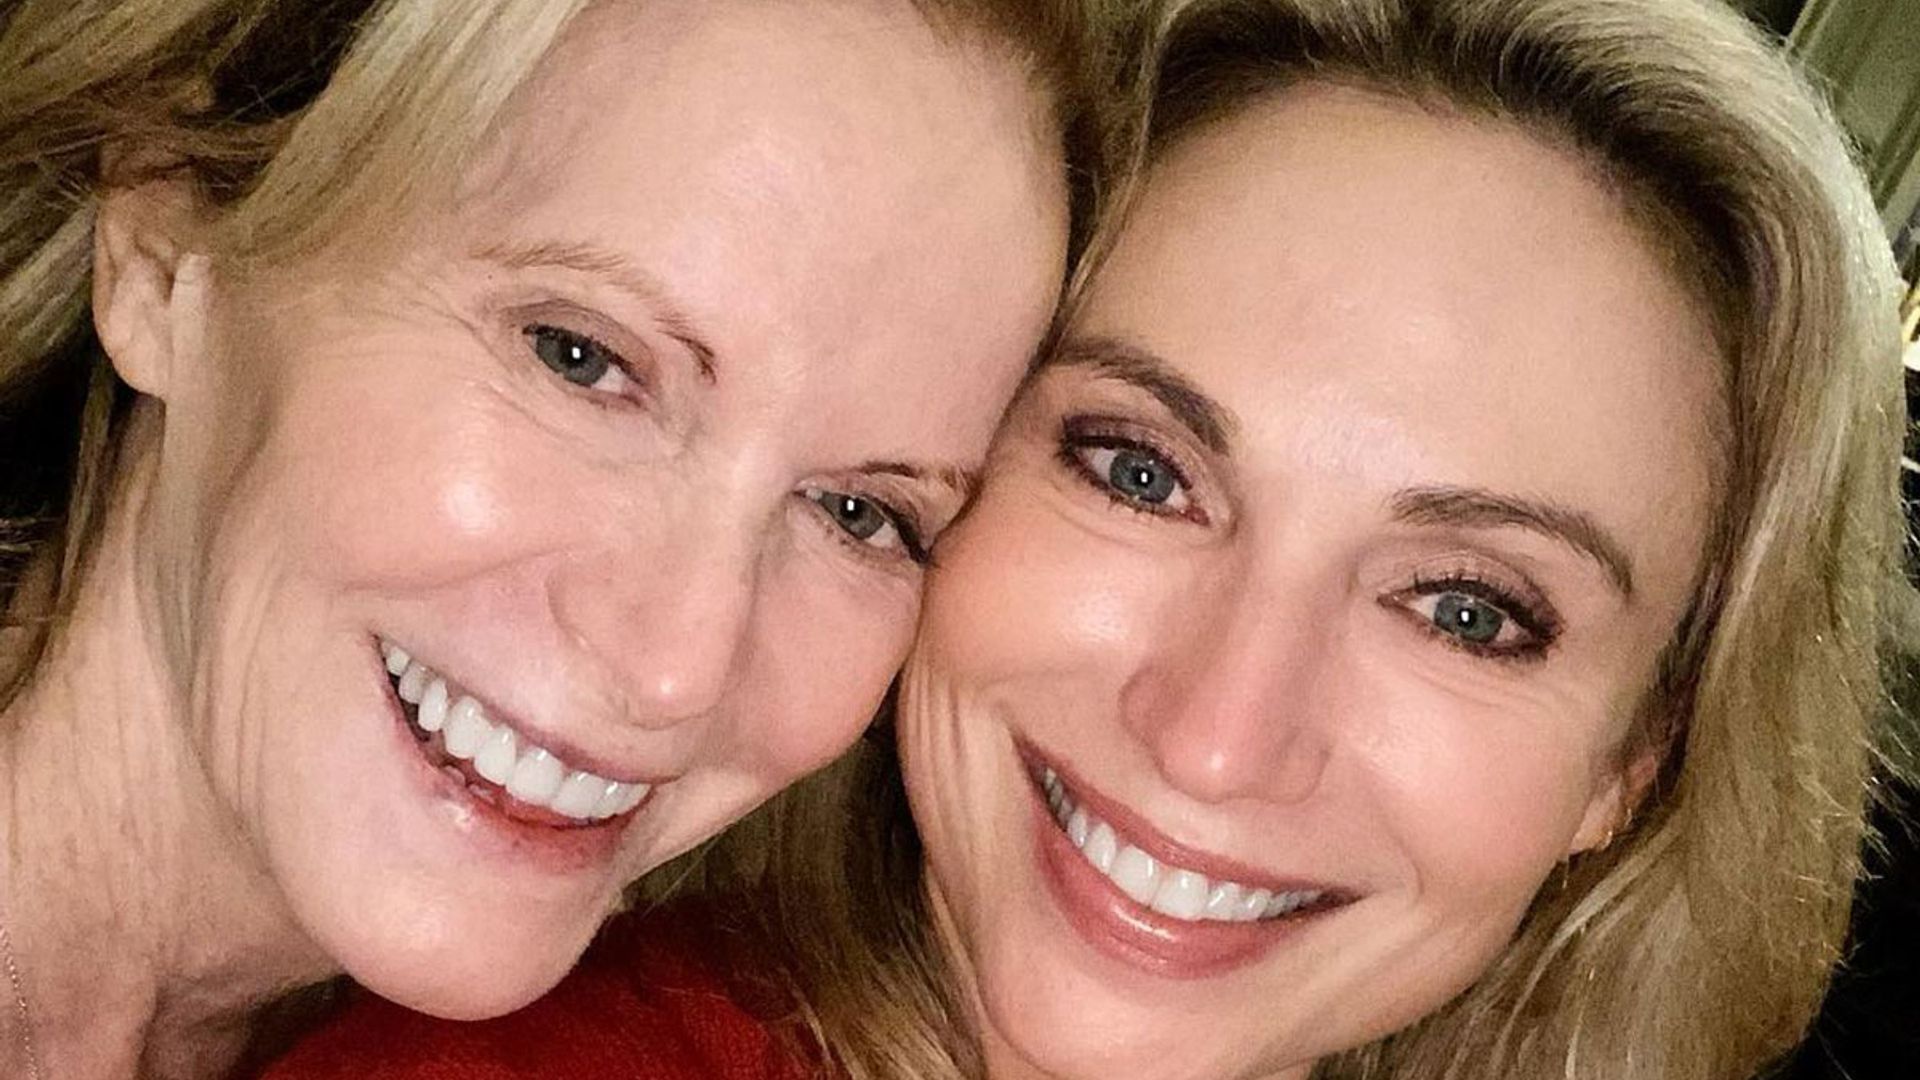 Amy Robach looks radiant alongside her mom and dad in rare family photo